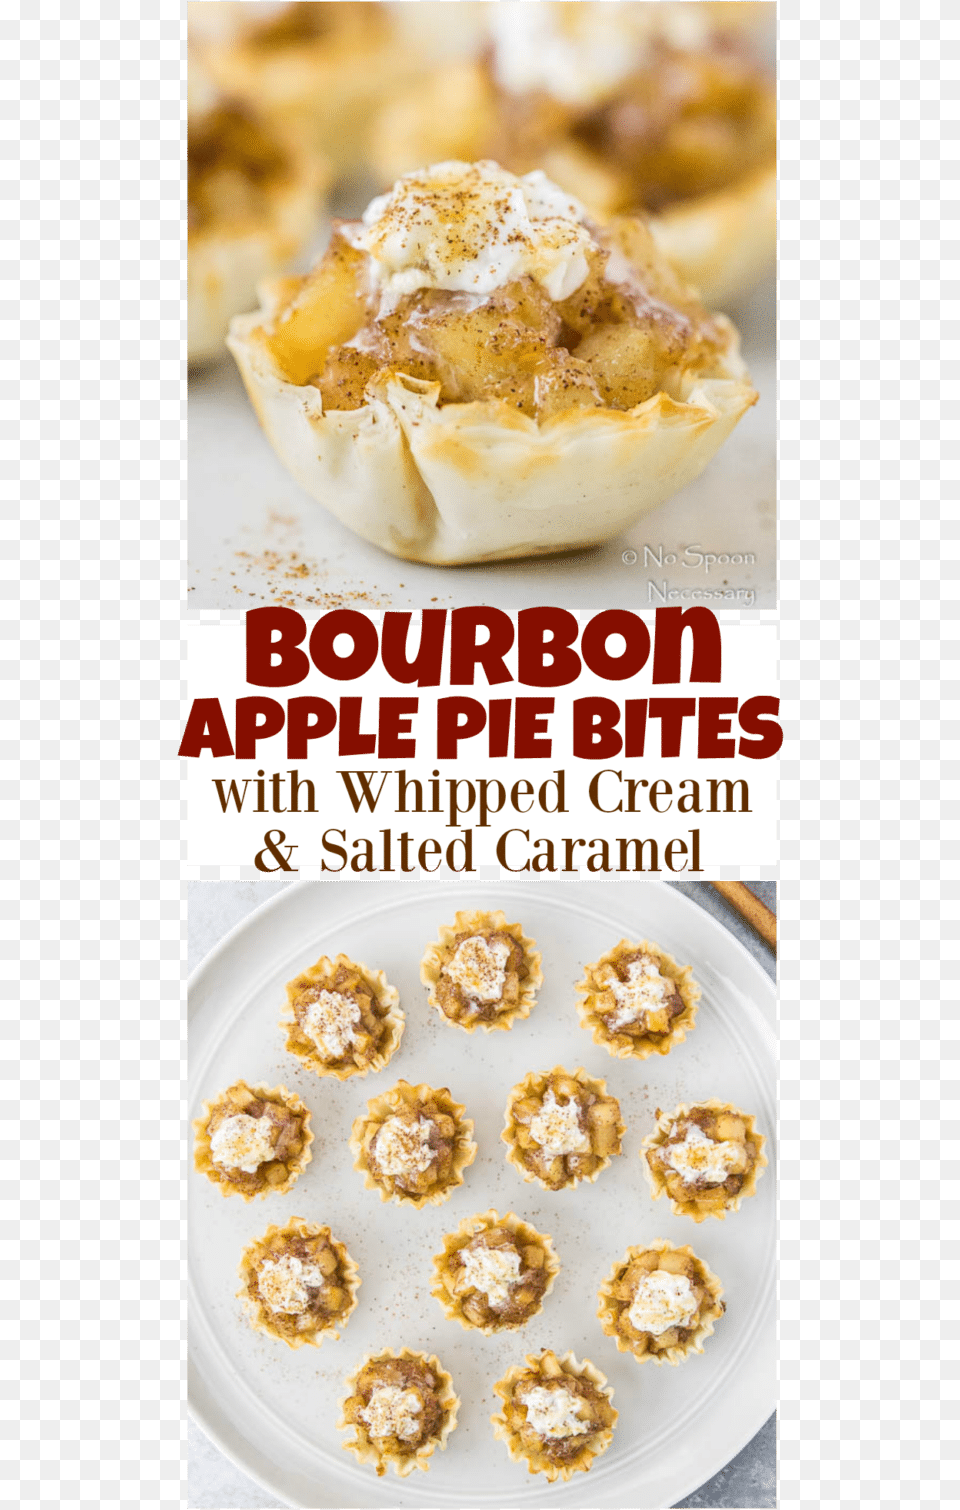 Bourbon Apple Pie Bites With Whipped Cream Amp Salted Peanut Butter Cookie, Cake, Dessert, Food, Plate Png Image